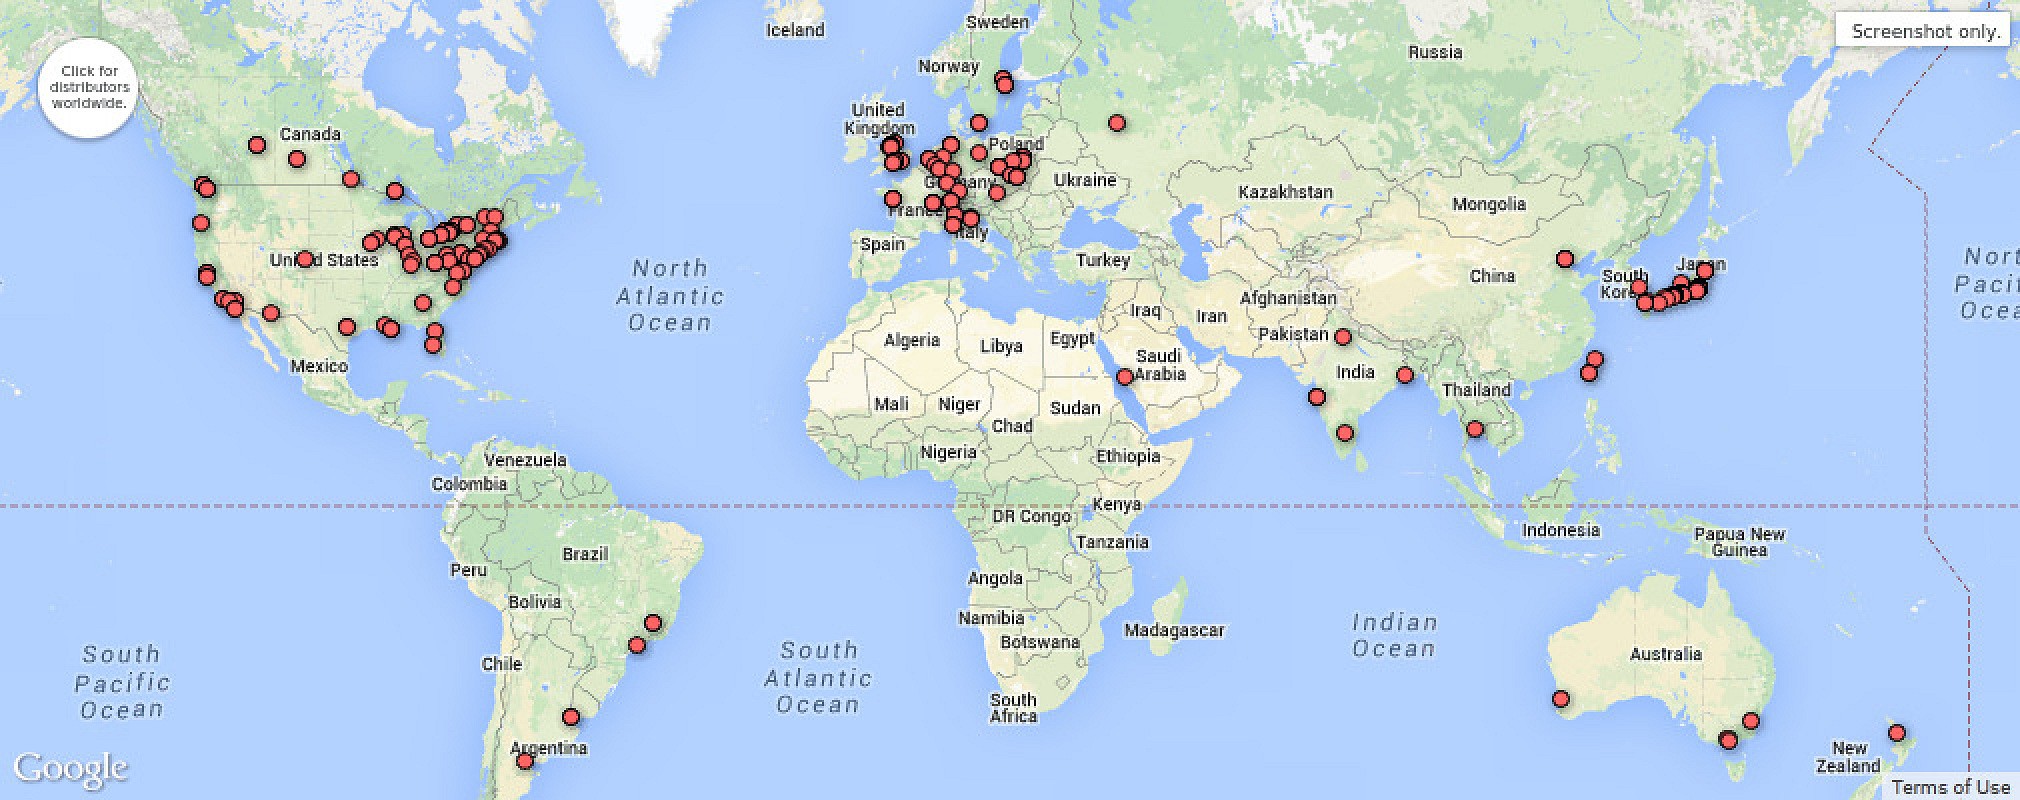 Our clients worldwide. Google map image.